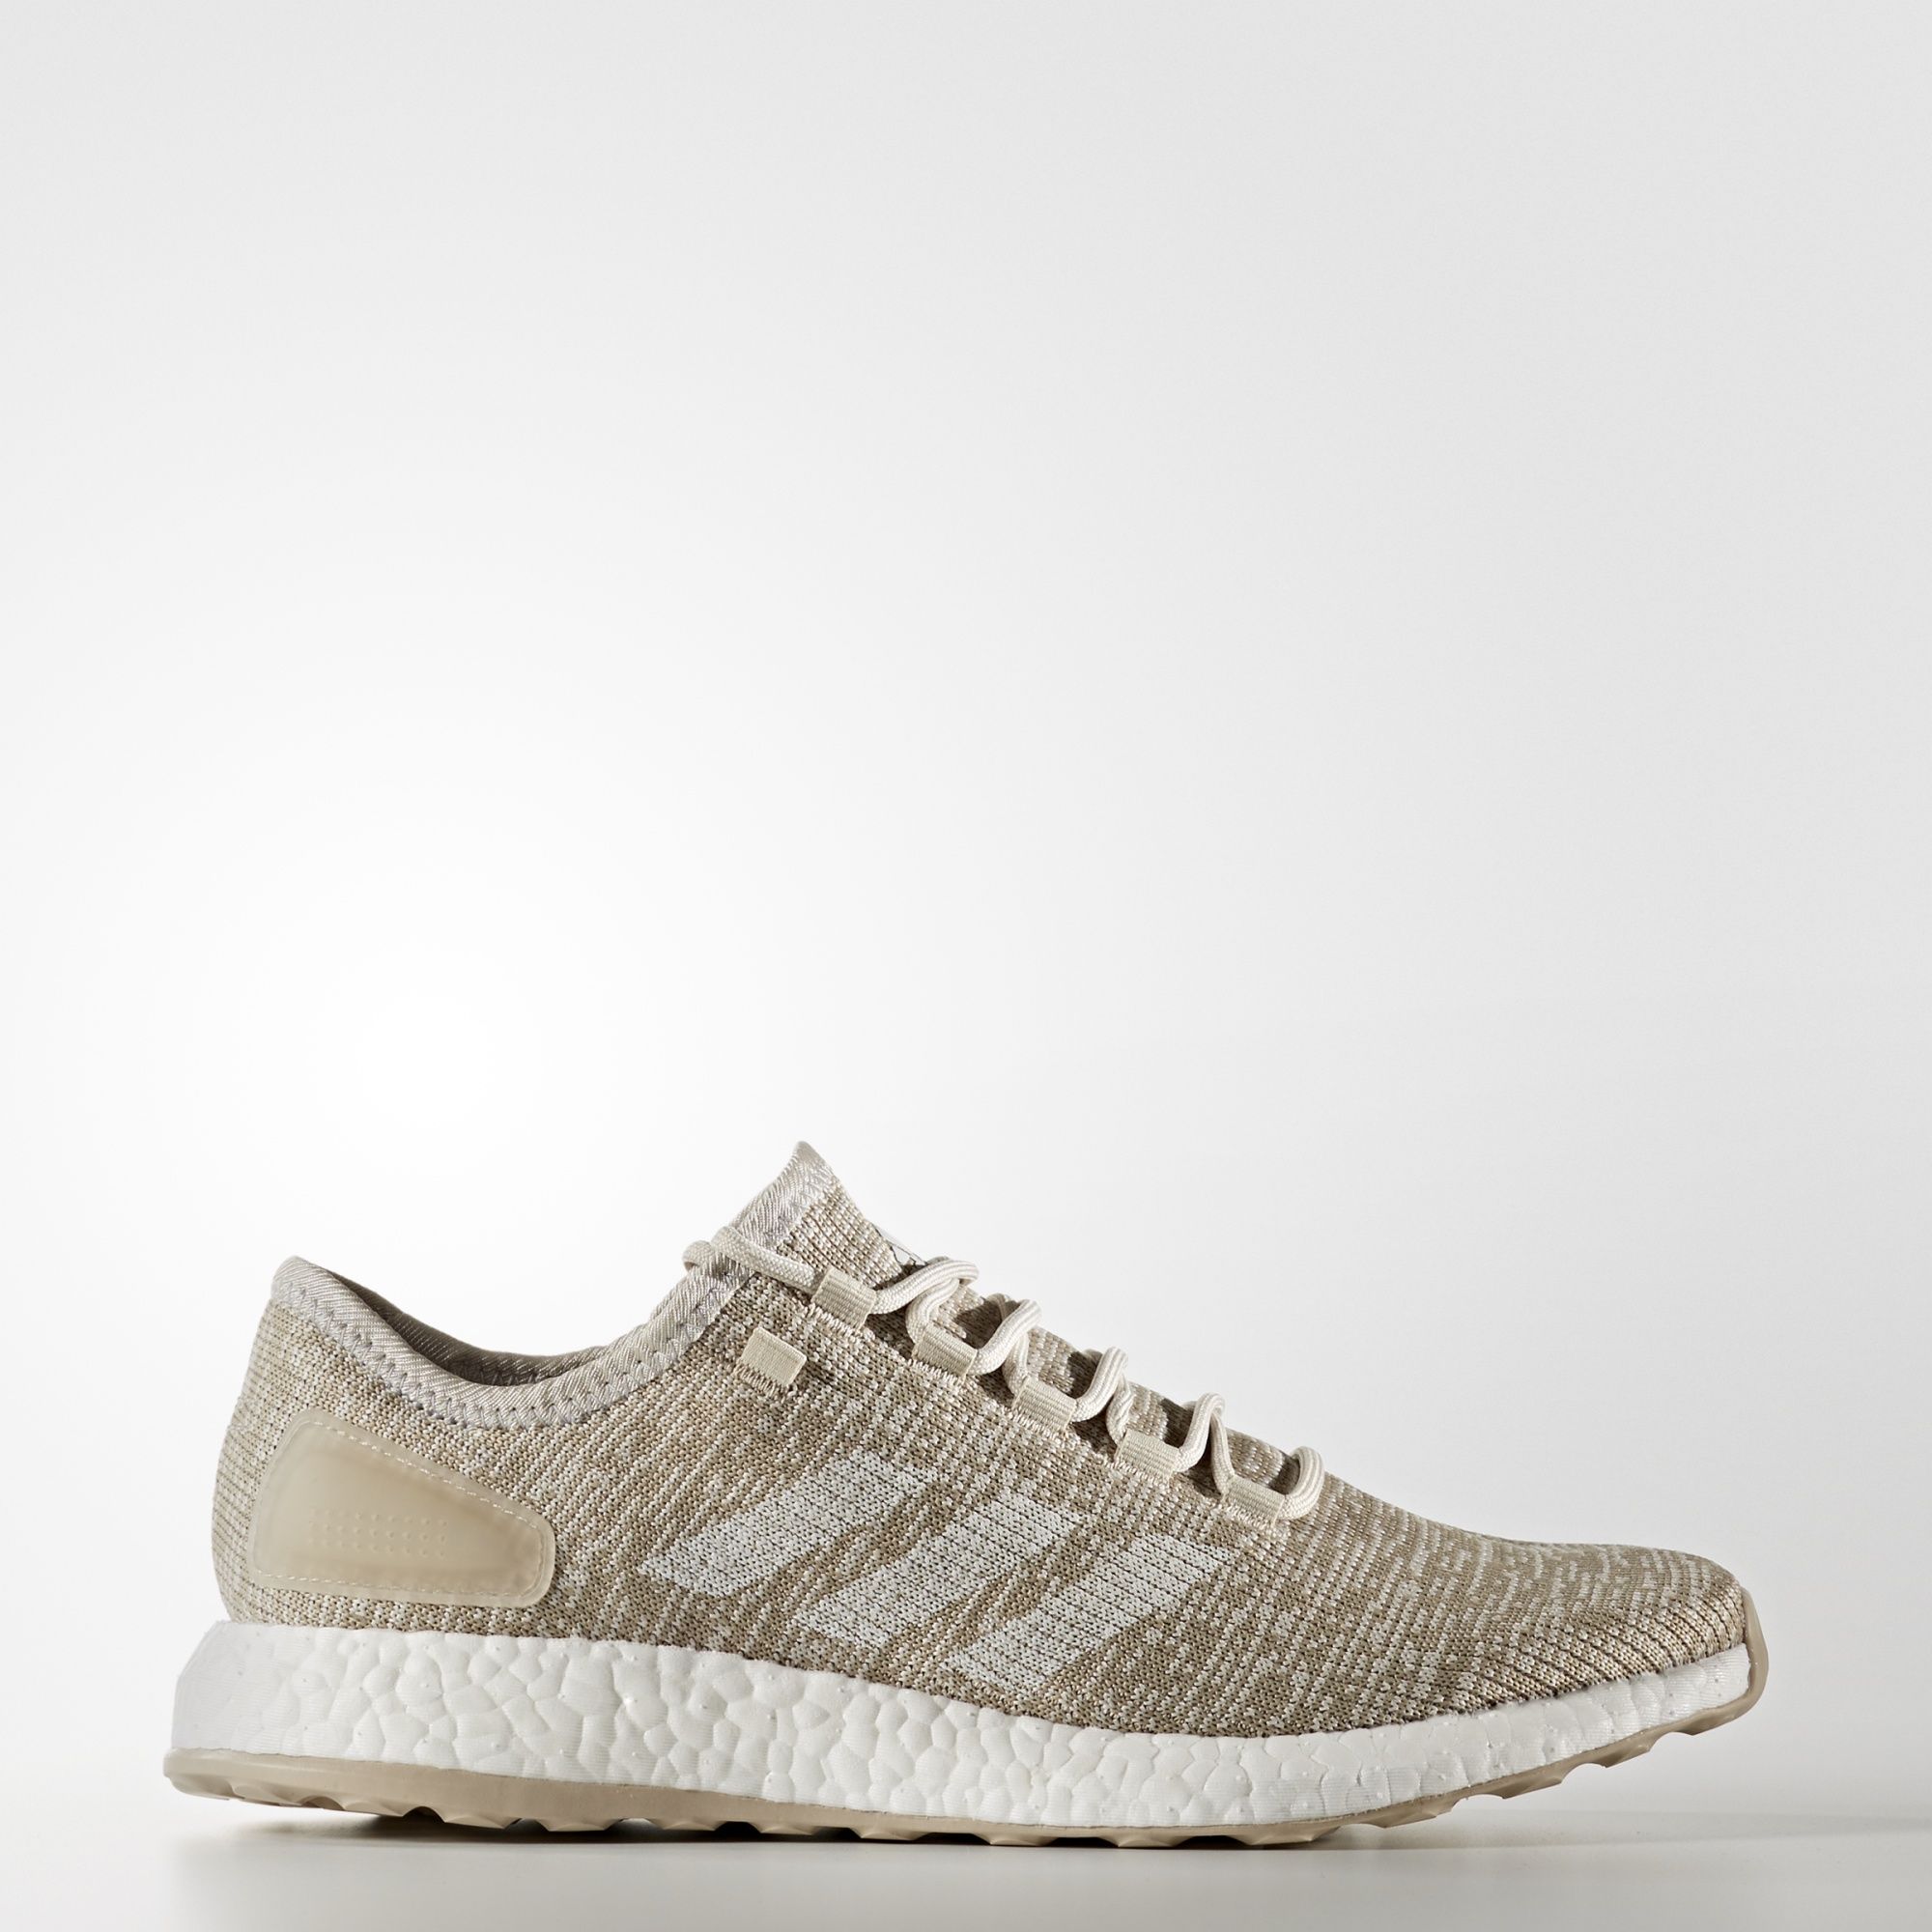 adidas-pure-boost-clima-brown-2